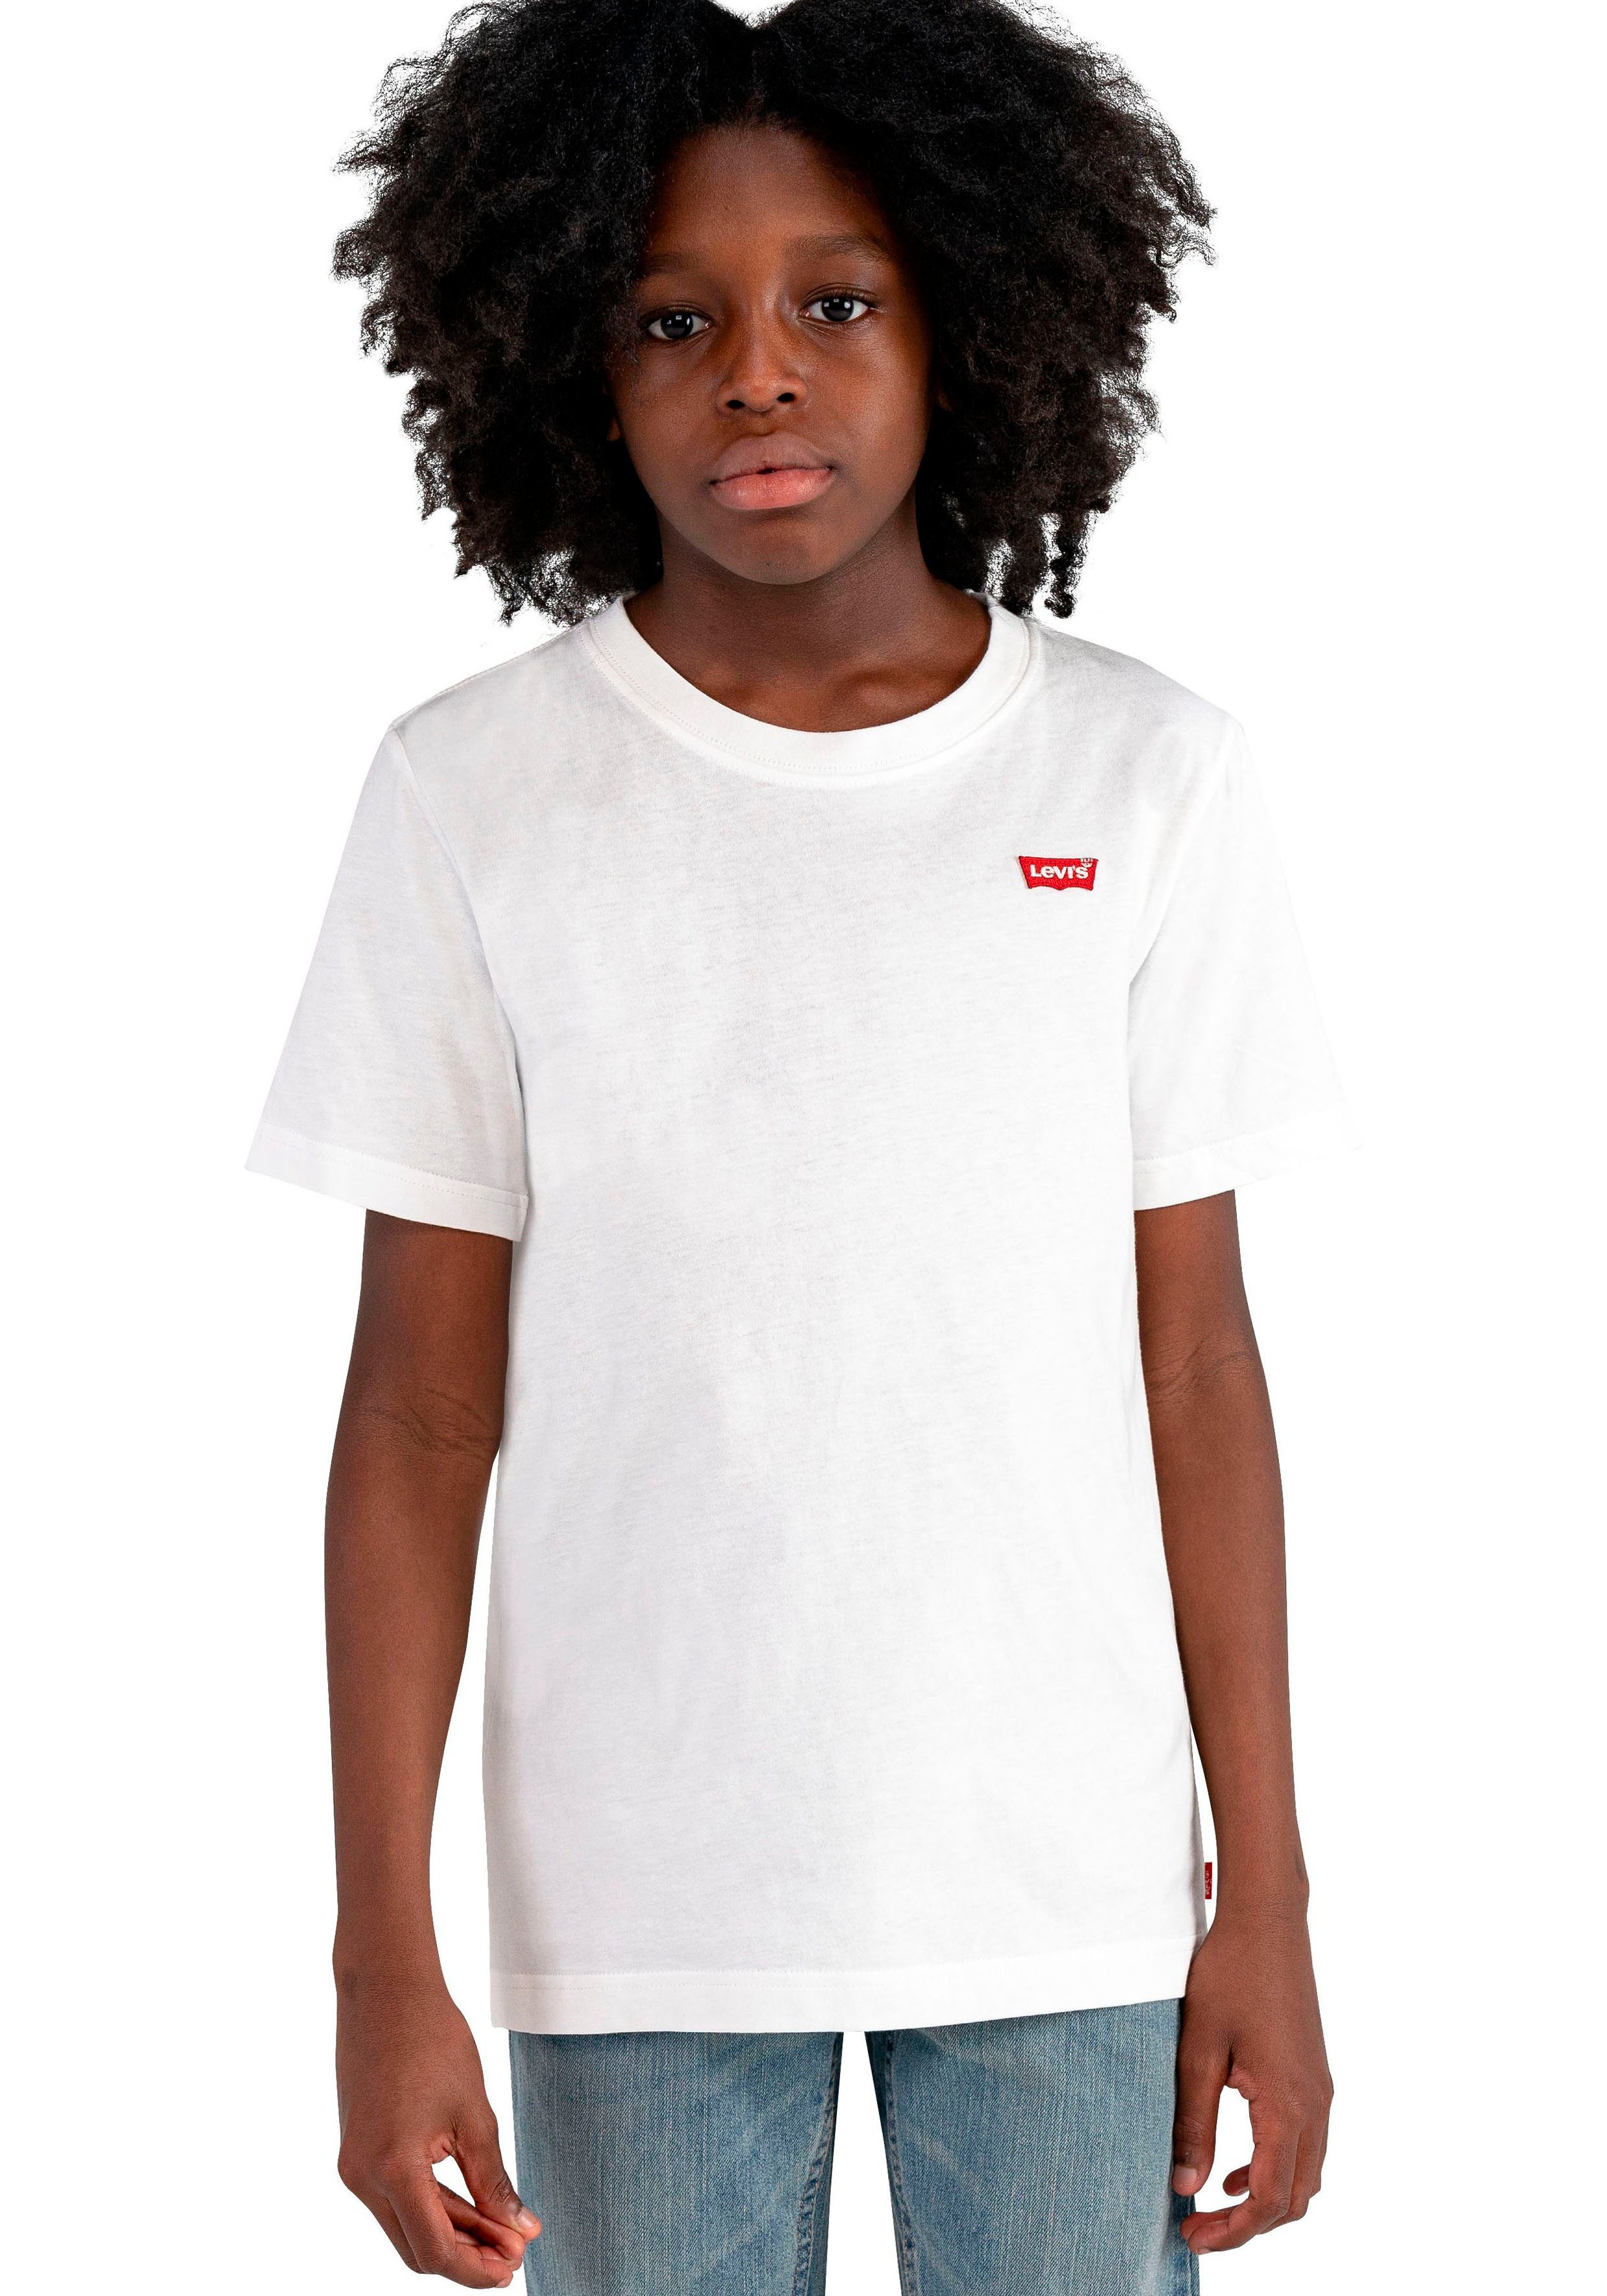 Levi's® Kids T-Shirt white for HIT BOYS BATWING CHEST